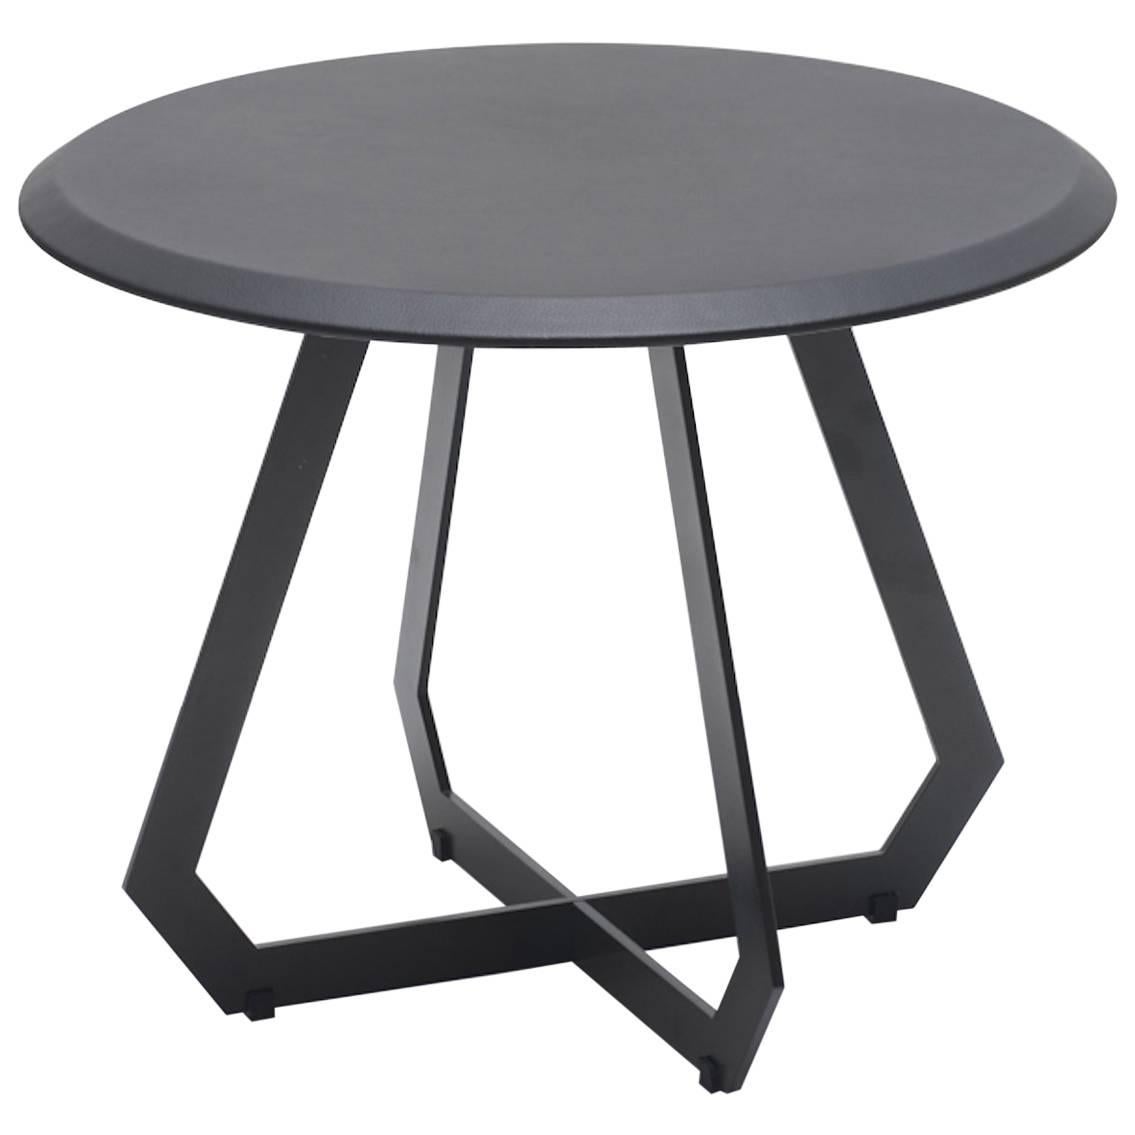 Fetish Table Black / Small, Side Table